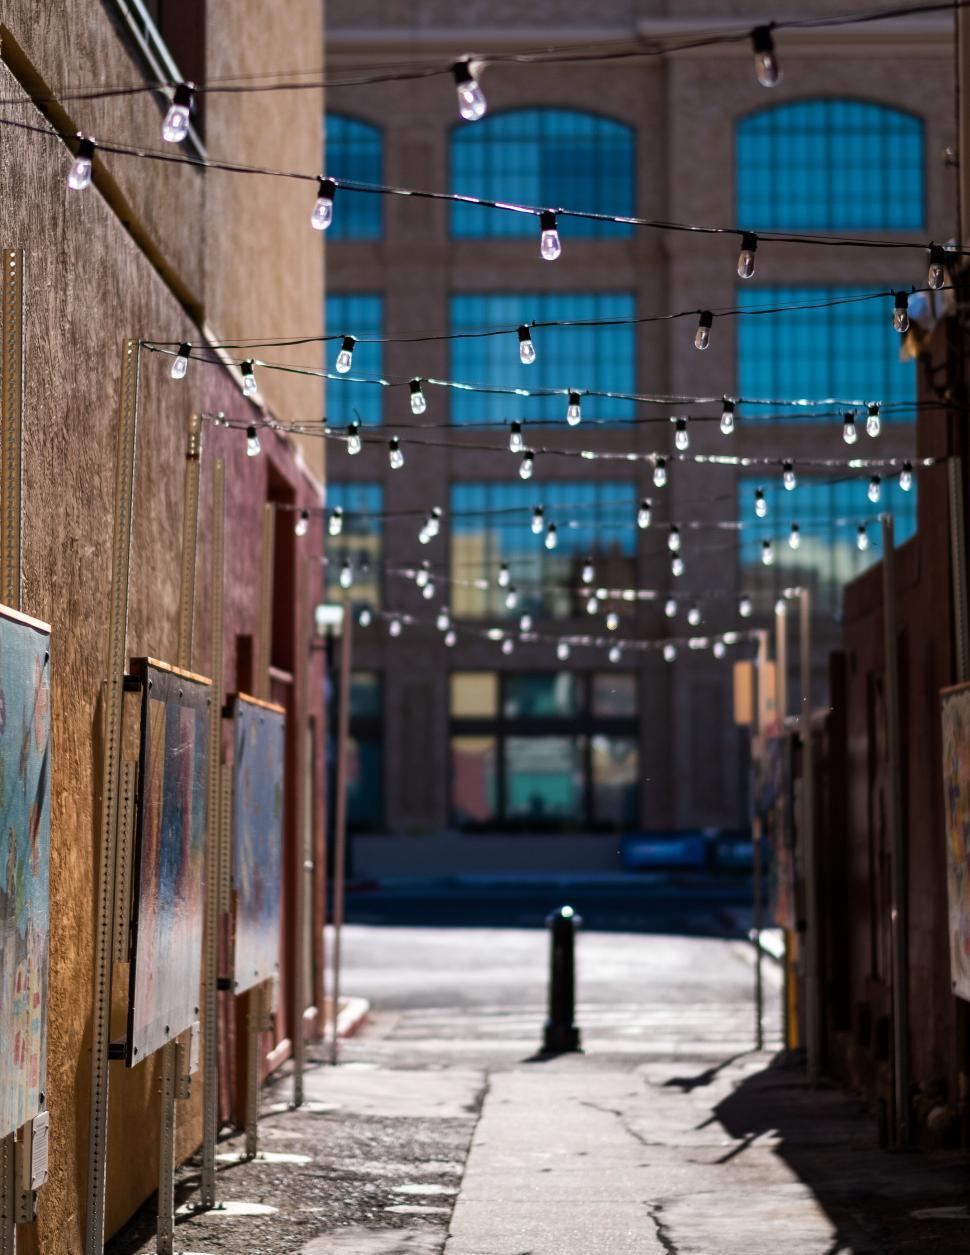 Free Image of Urban alley with hanging lights and artwork 